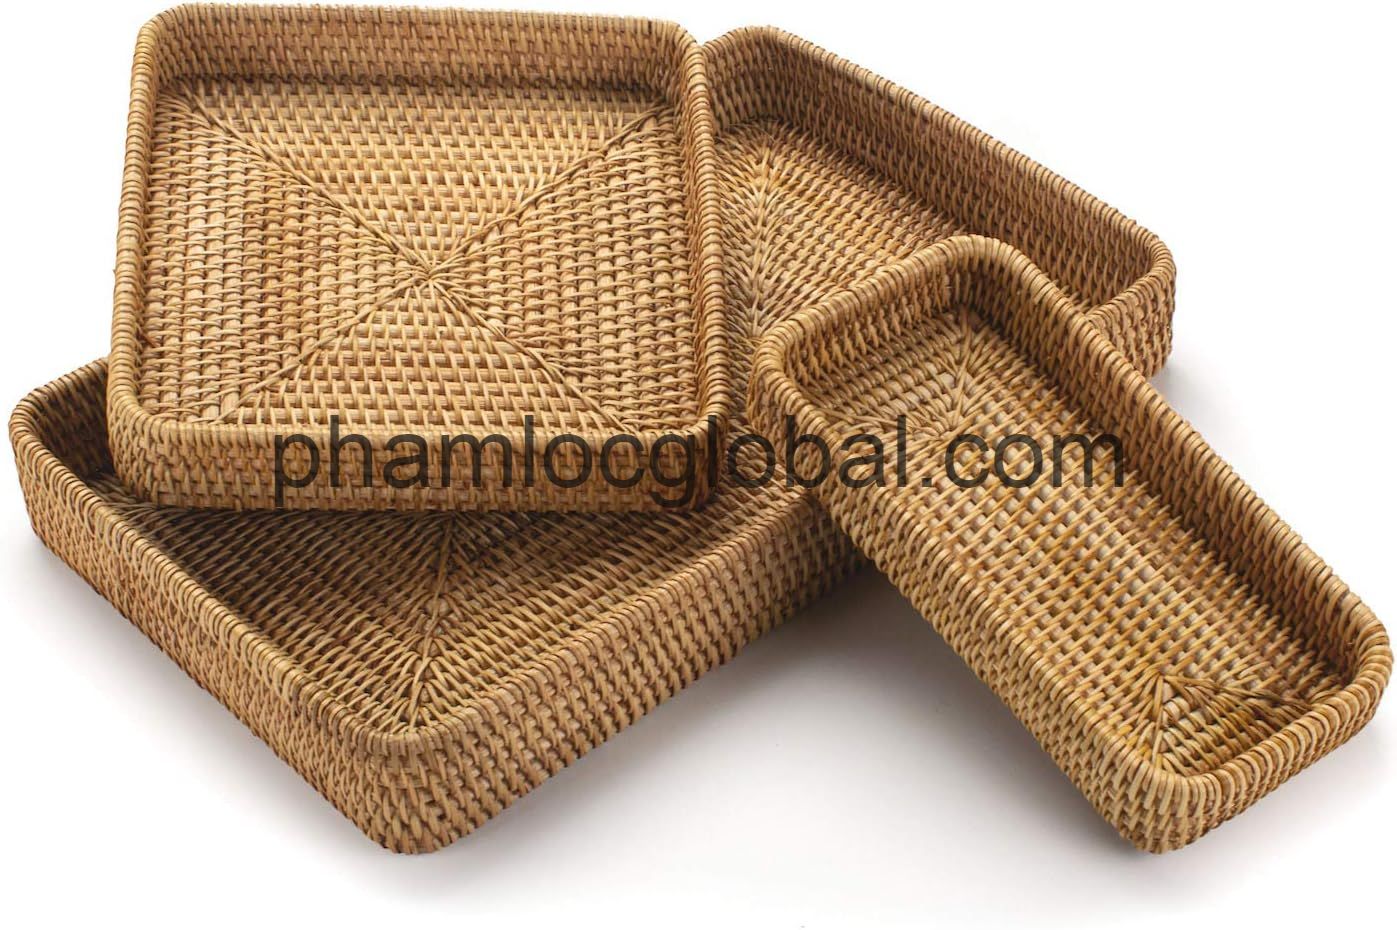 Rattan hand-woven products